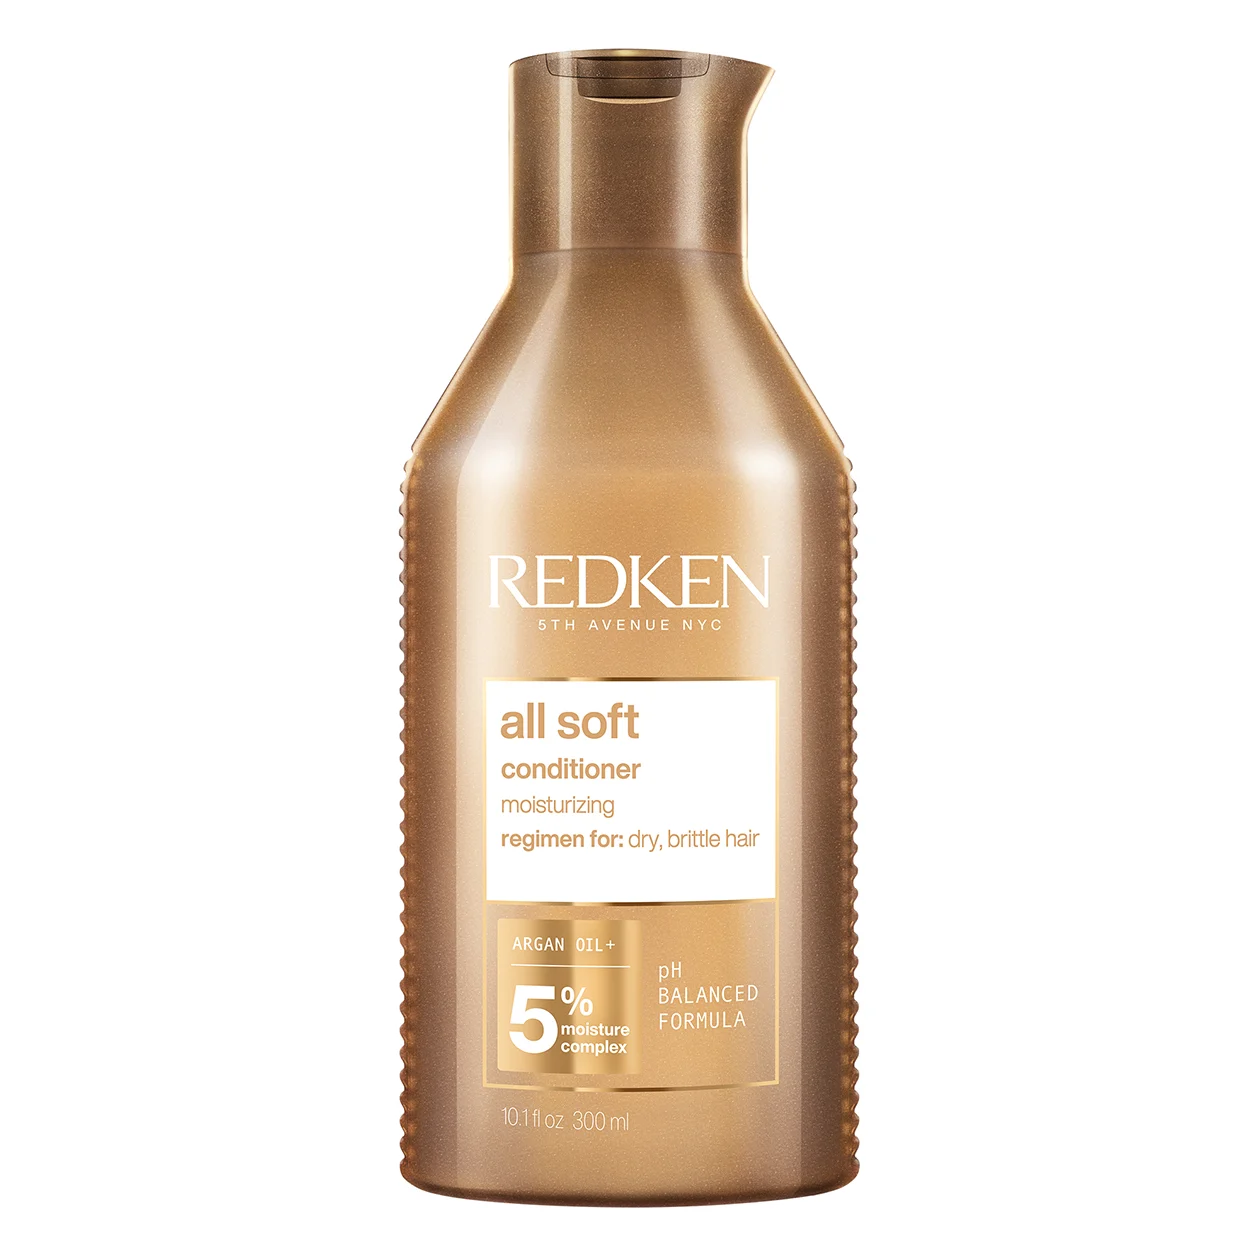 A tied FEMMENORDIC's choice in the Pureology vs Redken conditioner comparison, the Redken All Soft Conditioner.